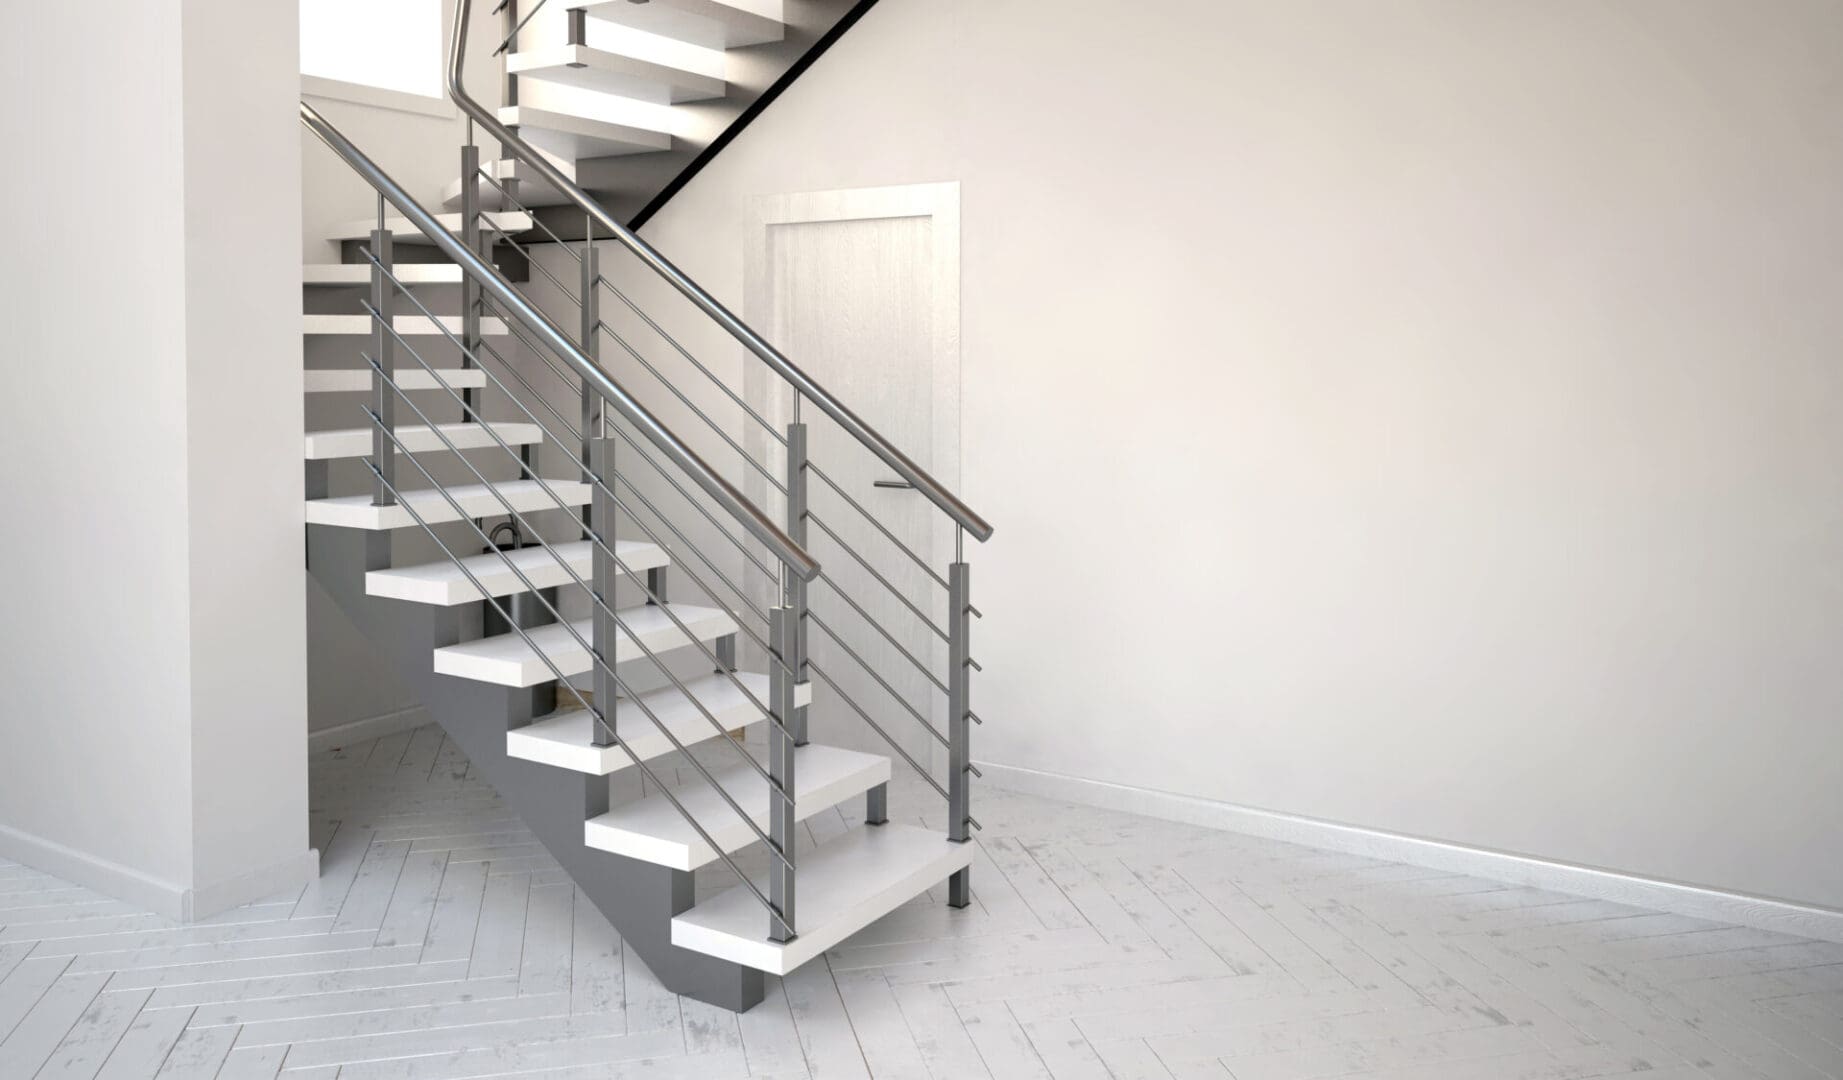 A white staircase with metal railing and handrails.